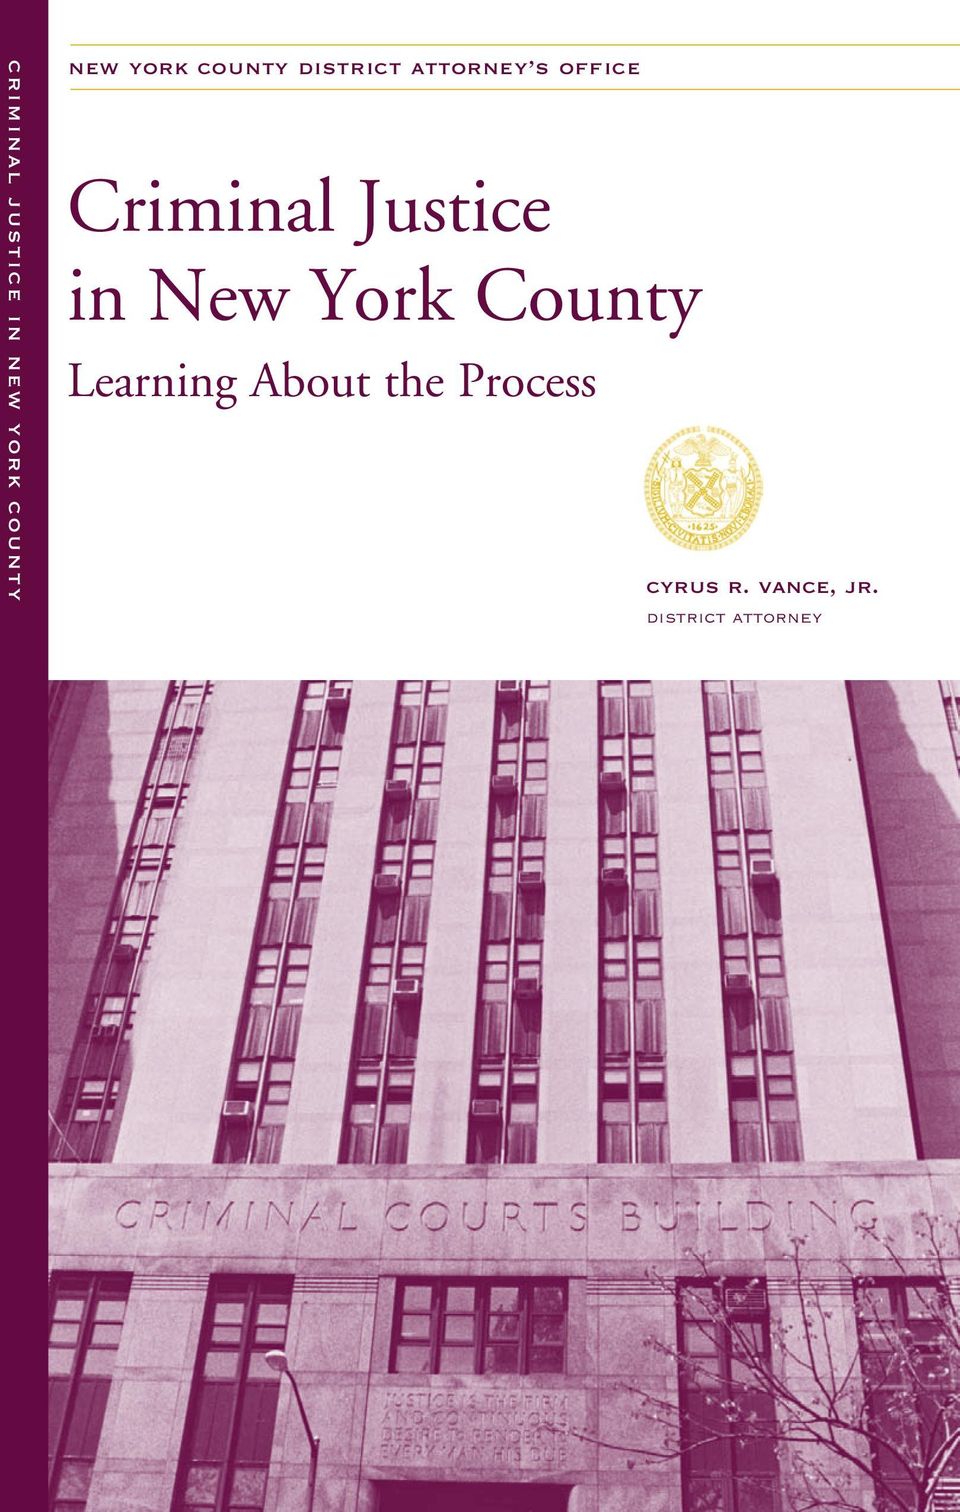 Justice in New York County Learning About